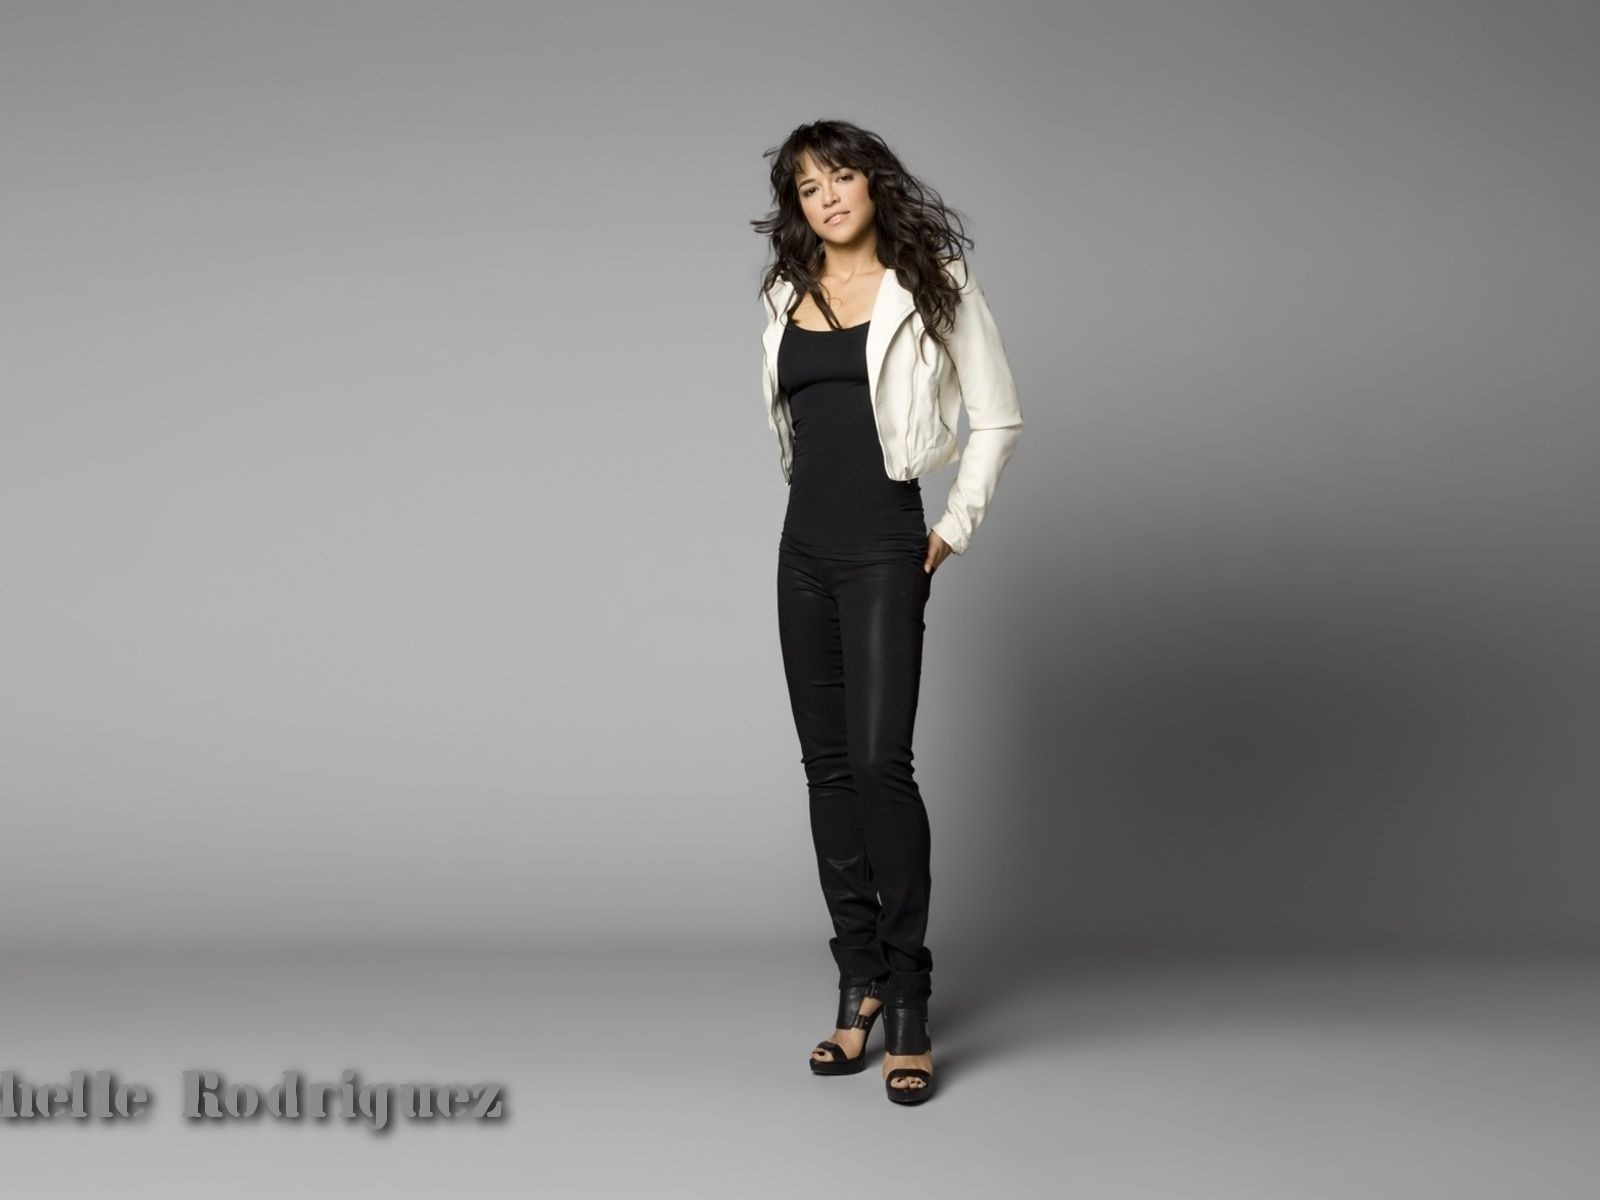 Michelle Rodriguez #011 - 1600x1200 Wallpapers Pictures Photos Images